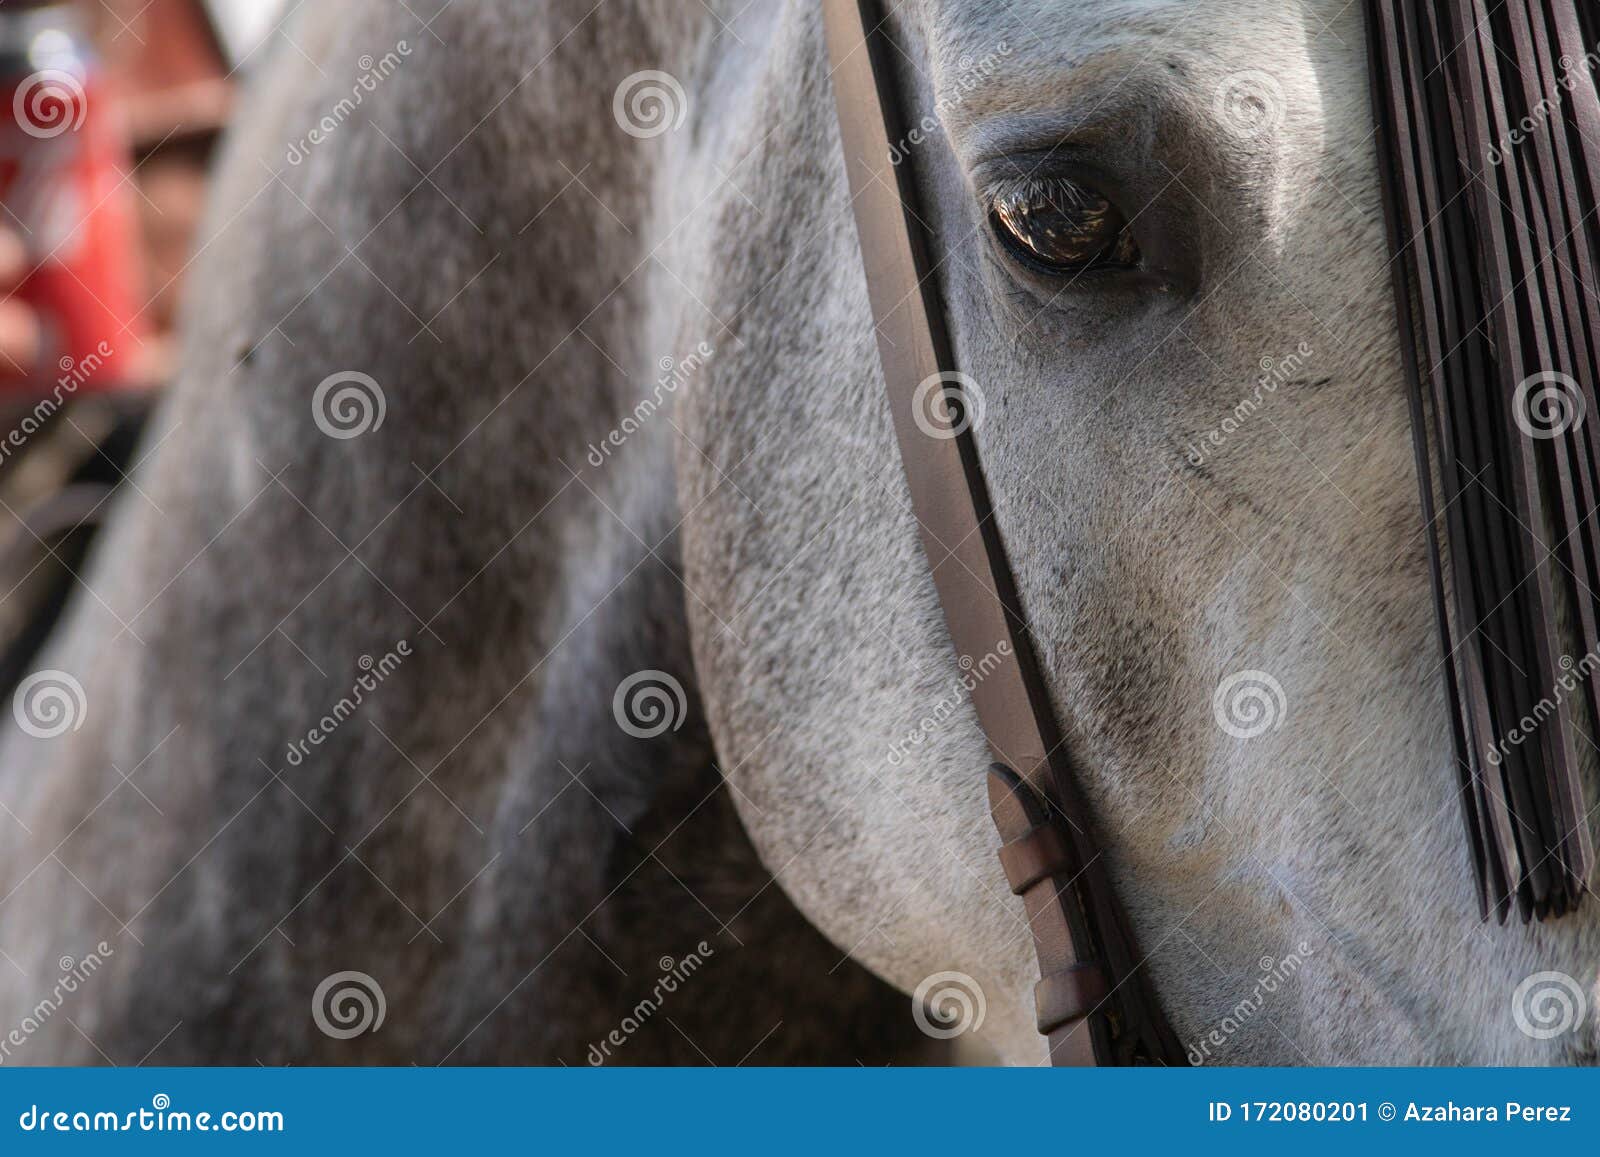 the eye of a spanish horse in doma vaquera